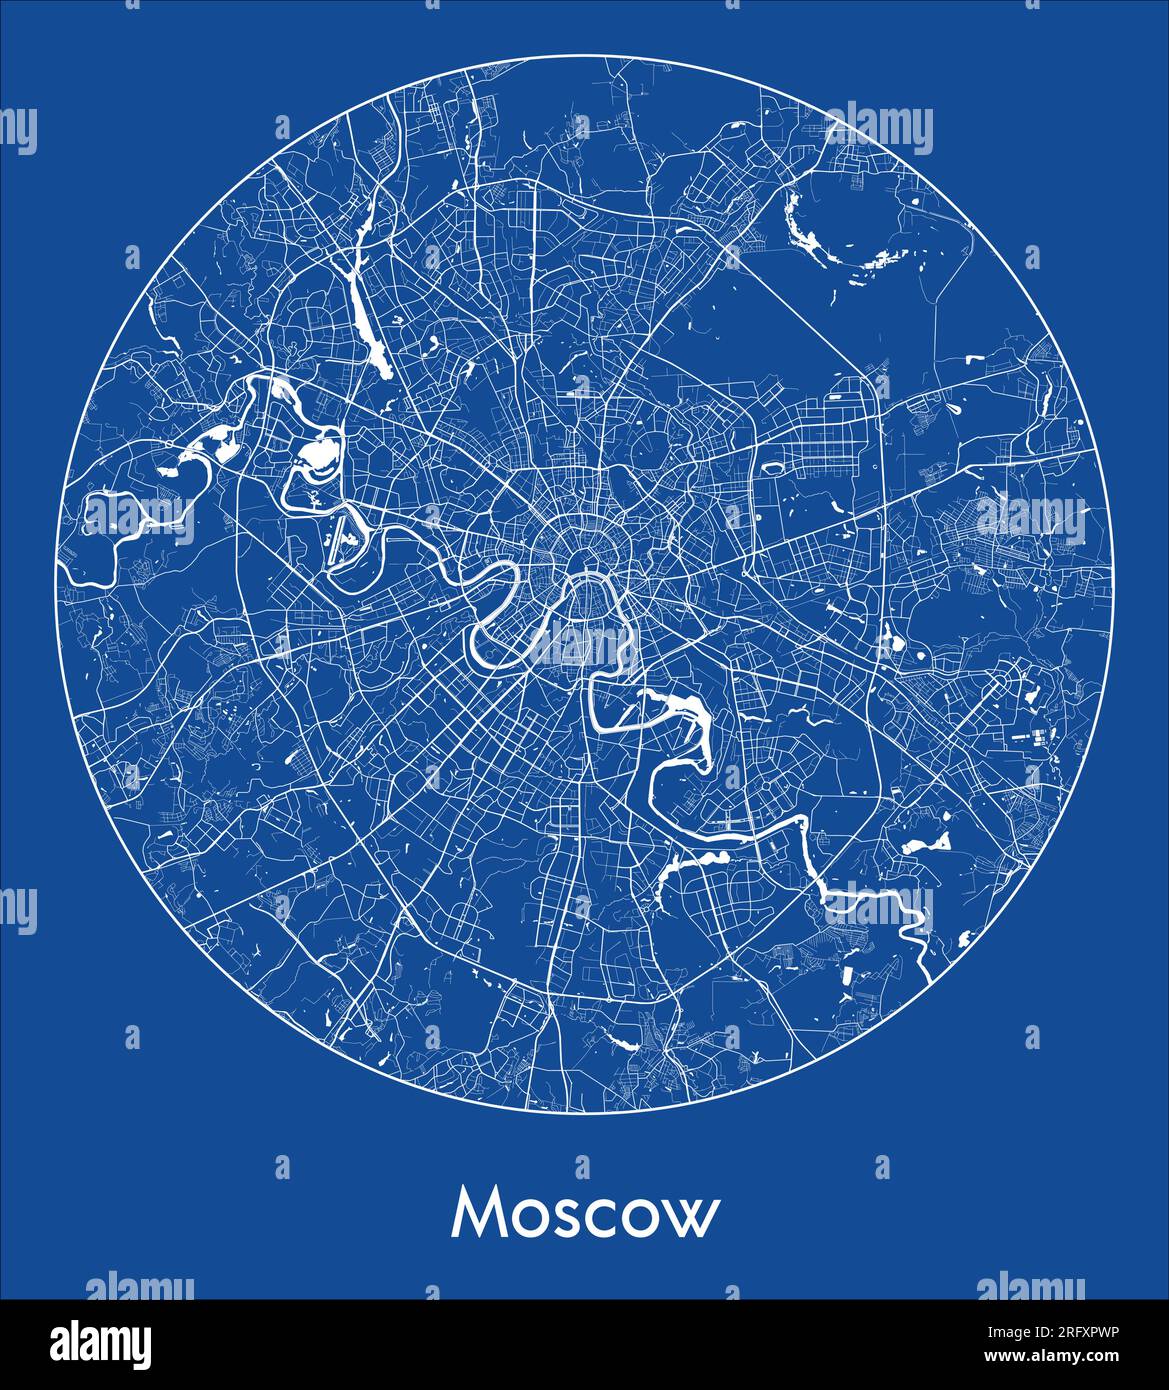 City Map Moscow Russia Europe blue print round Circle vector illustration Stock Vector